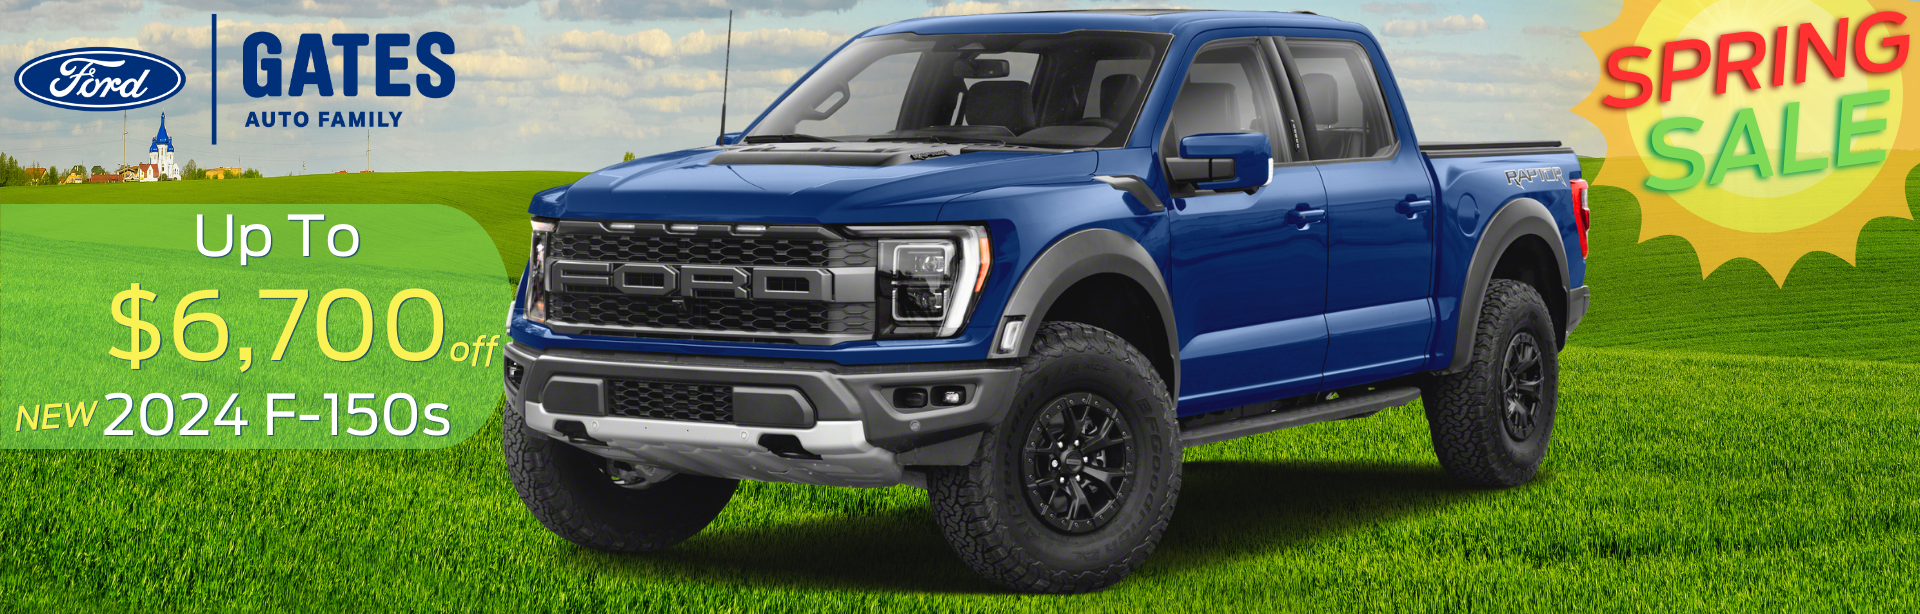 special discounts on new 2024 Ford F-150's